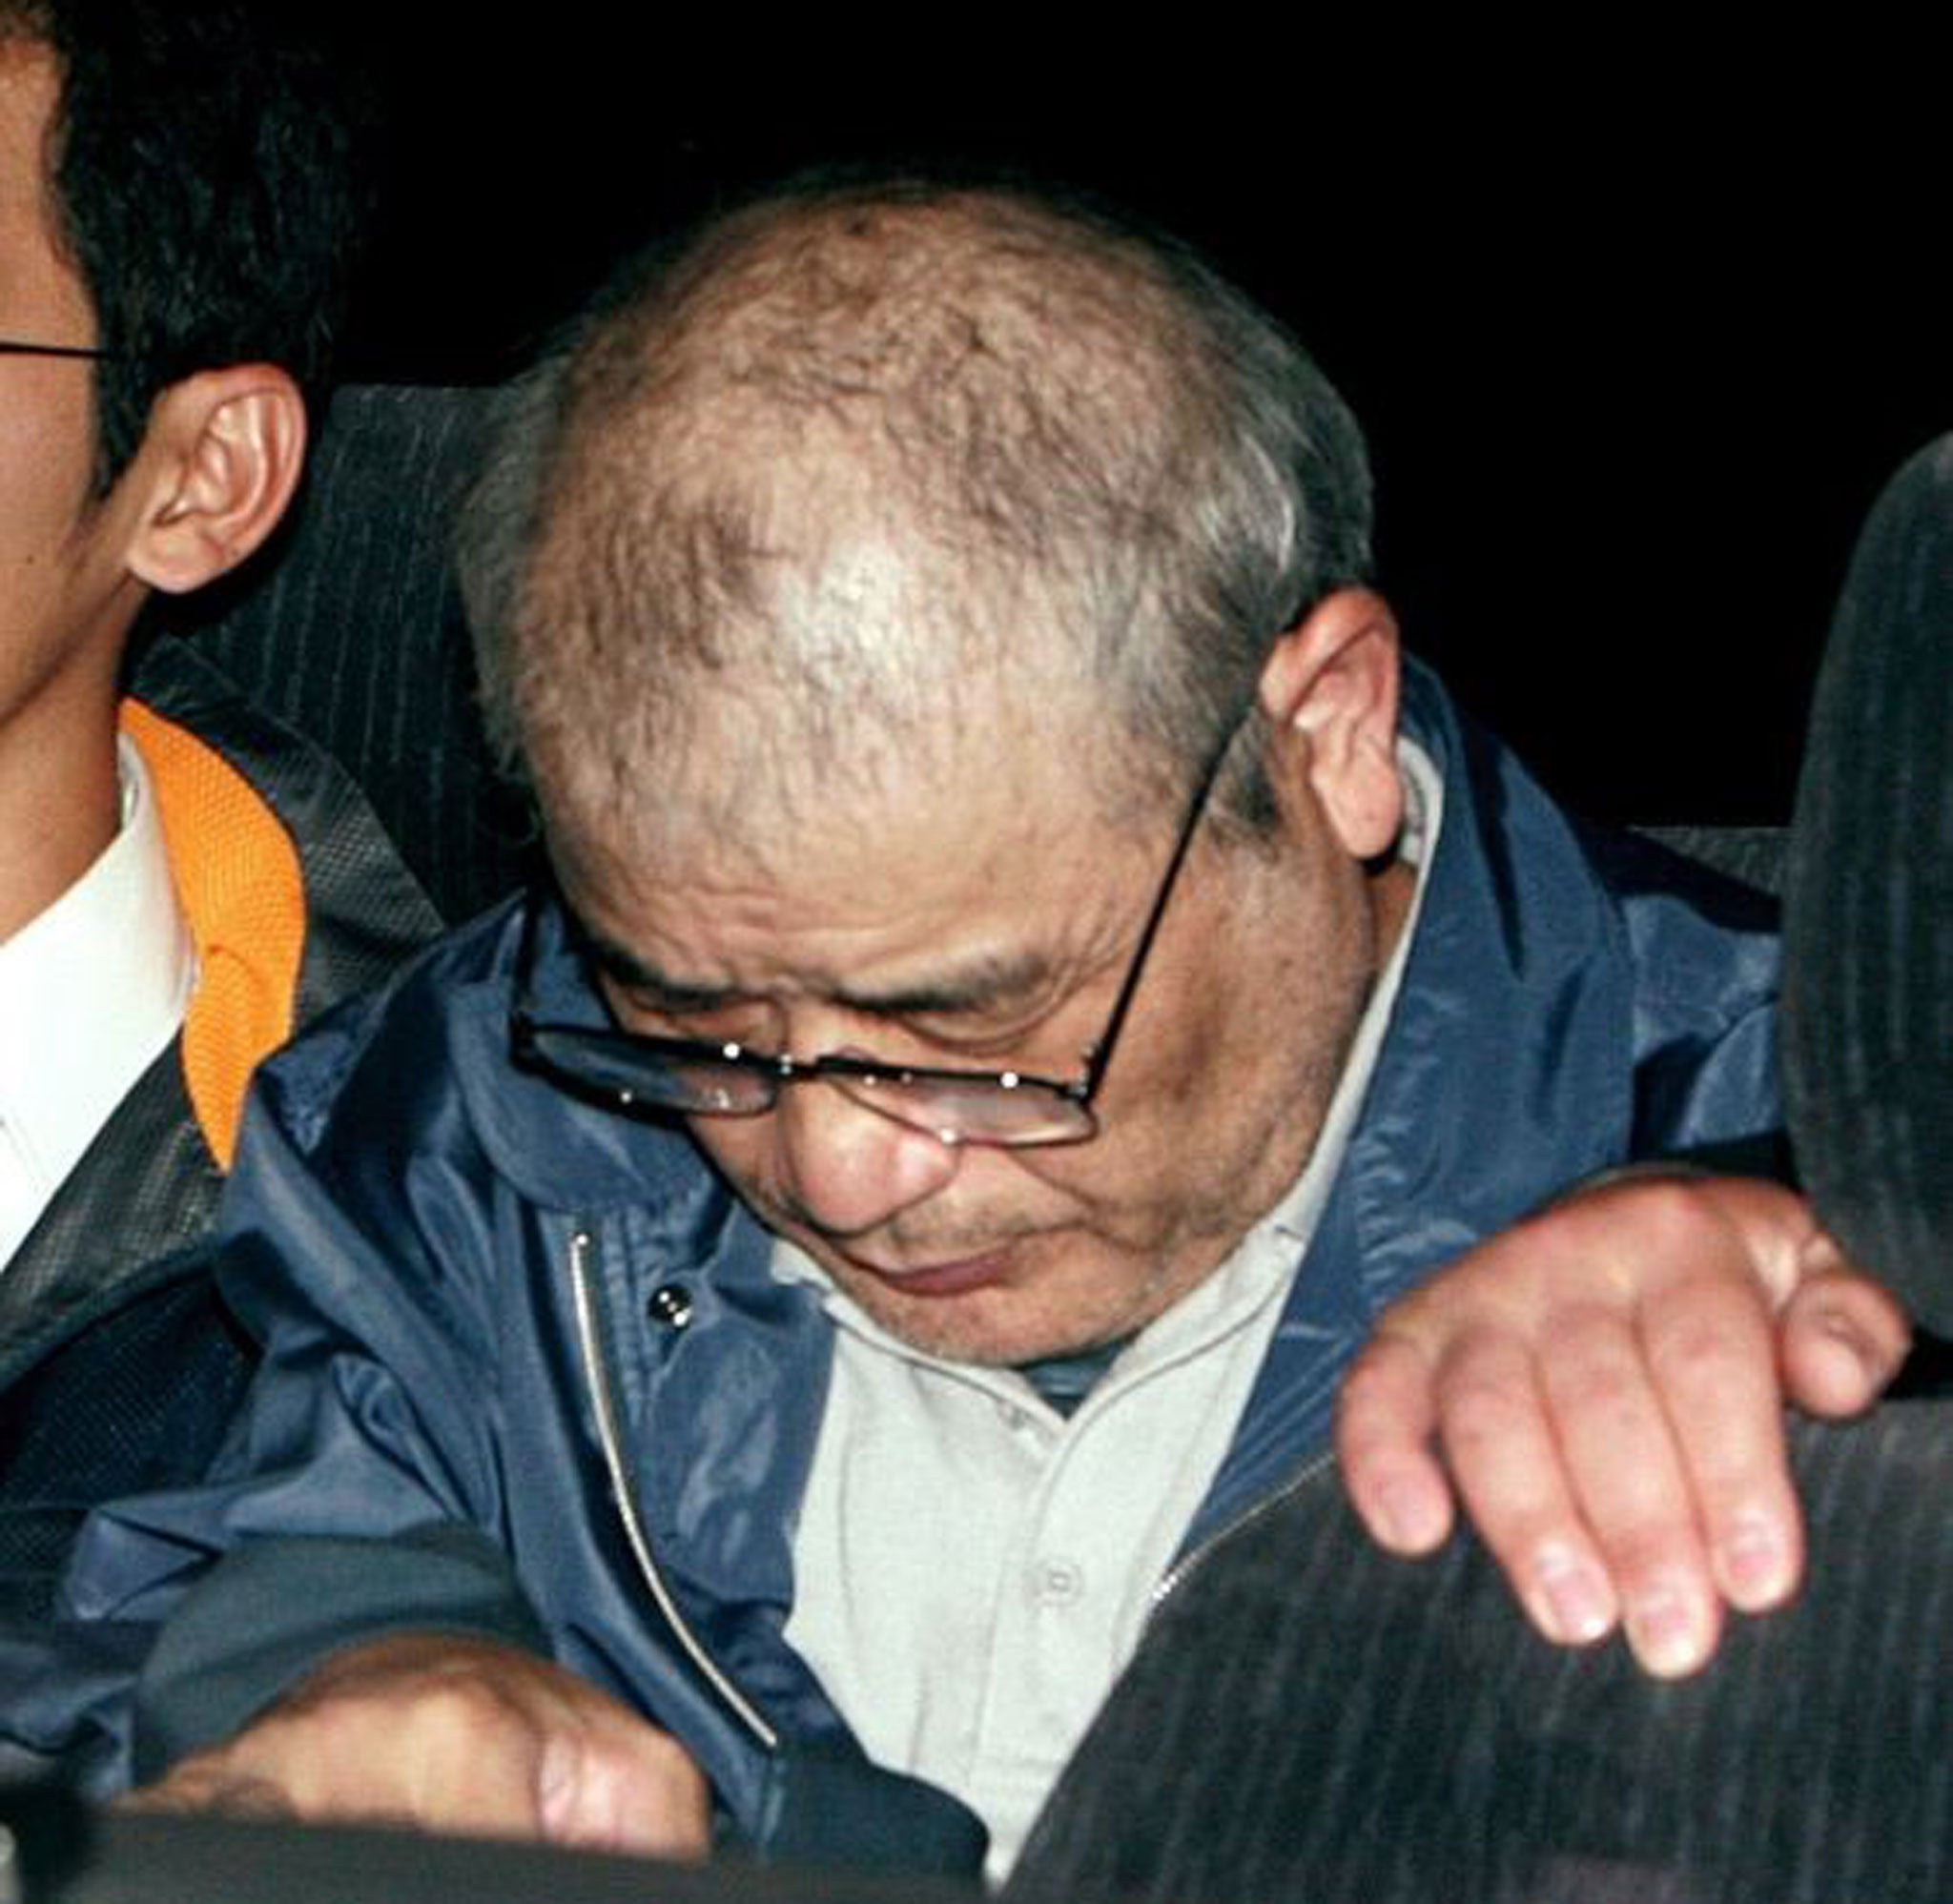 Ryoji Kagayama, seen here in 2008, has been hanged in Japan. It brings the number of prisoners executed since the conservative government of Shinzo Abe came to power a year ago to eight